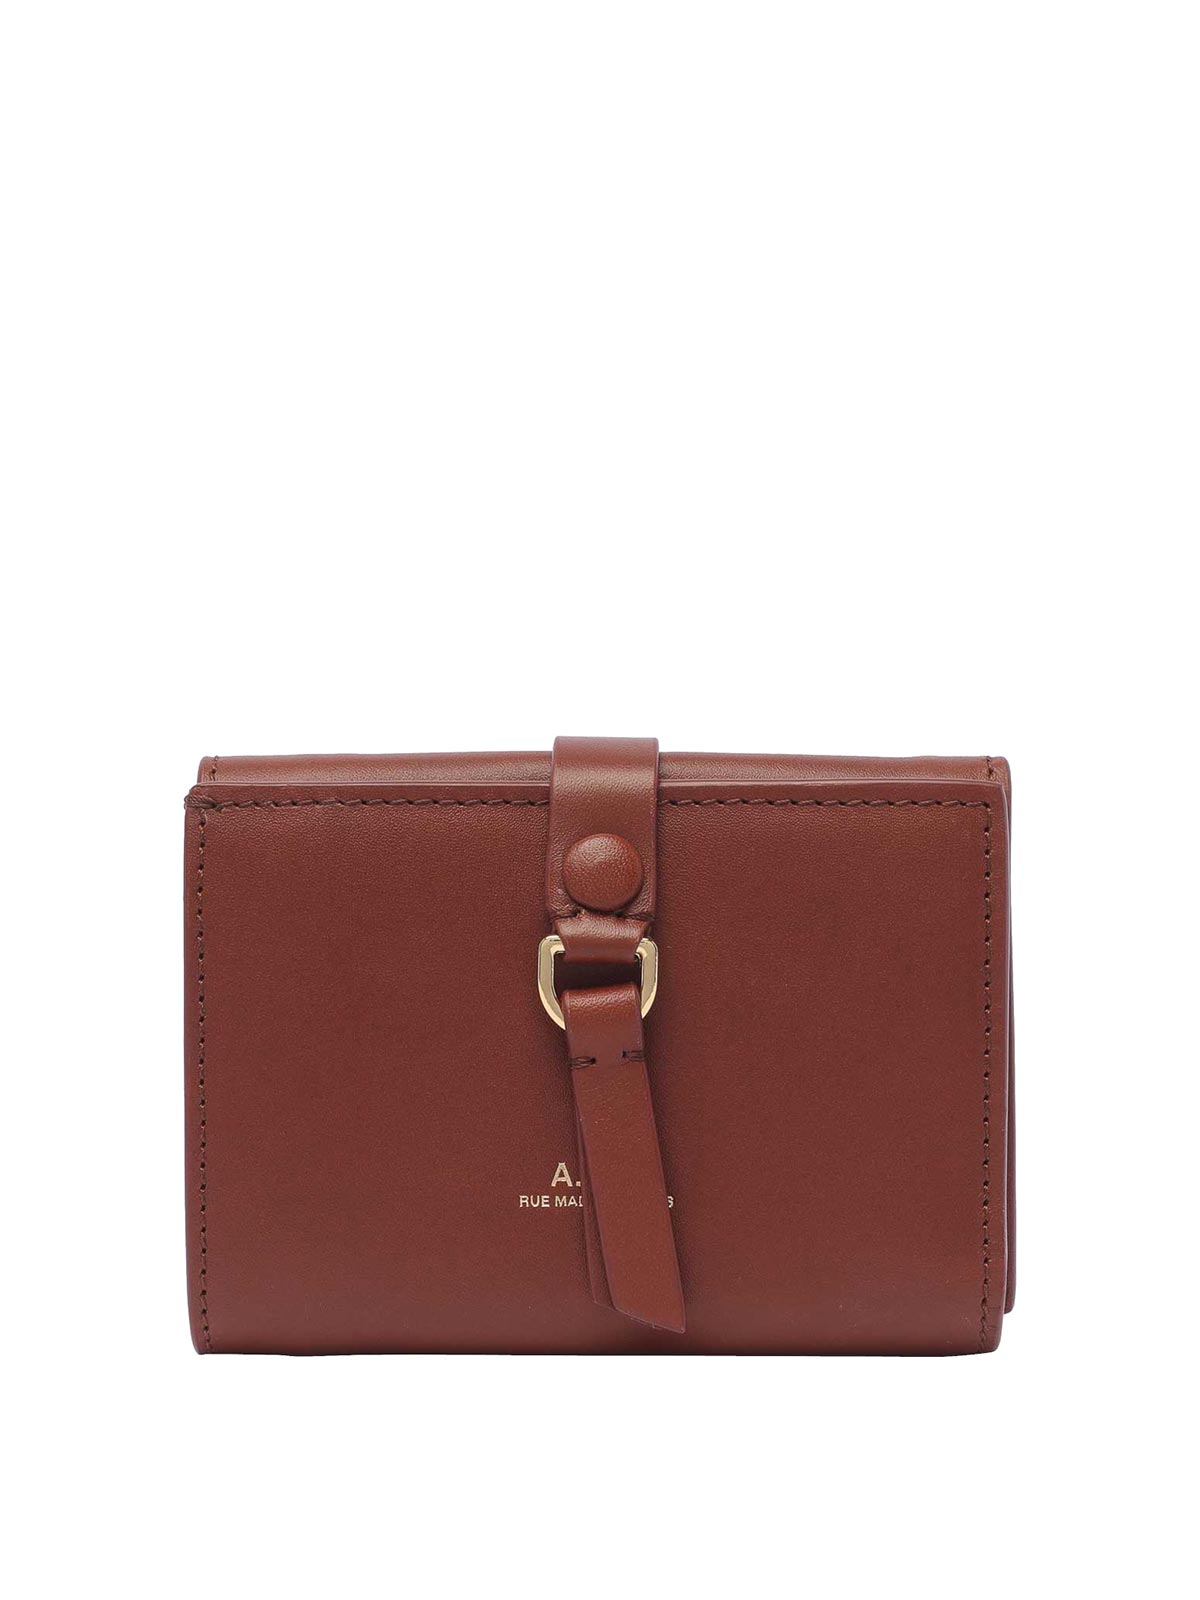 Apc Noa Trifold Wallet In Brown